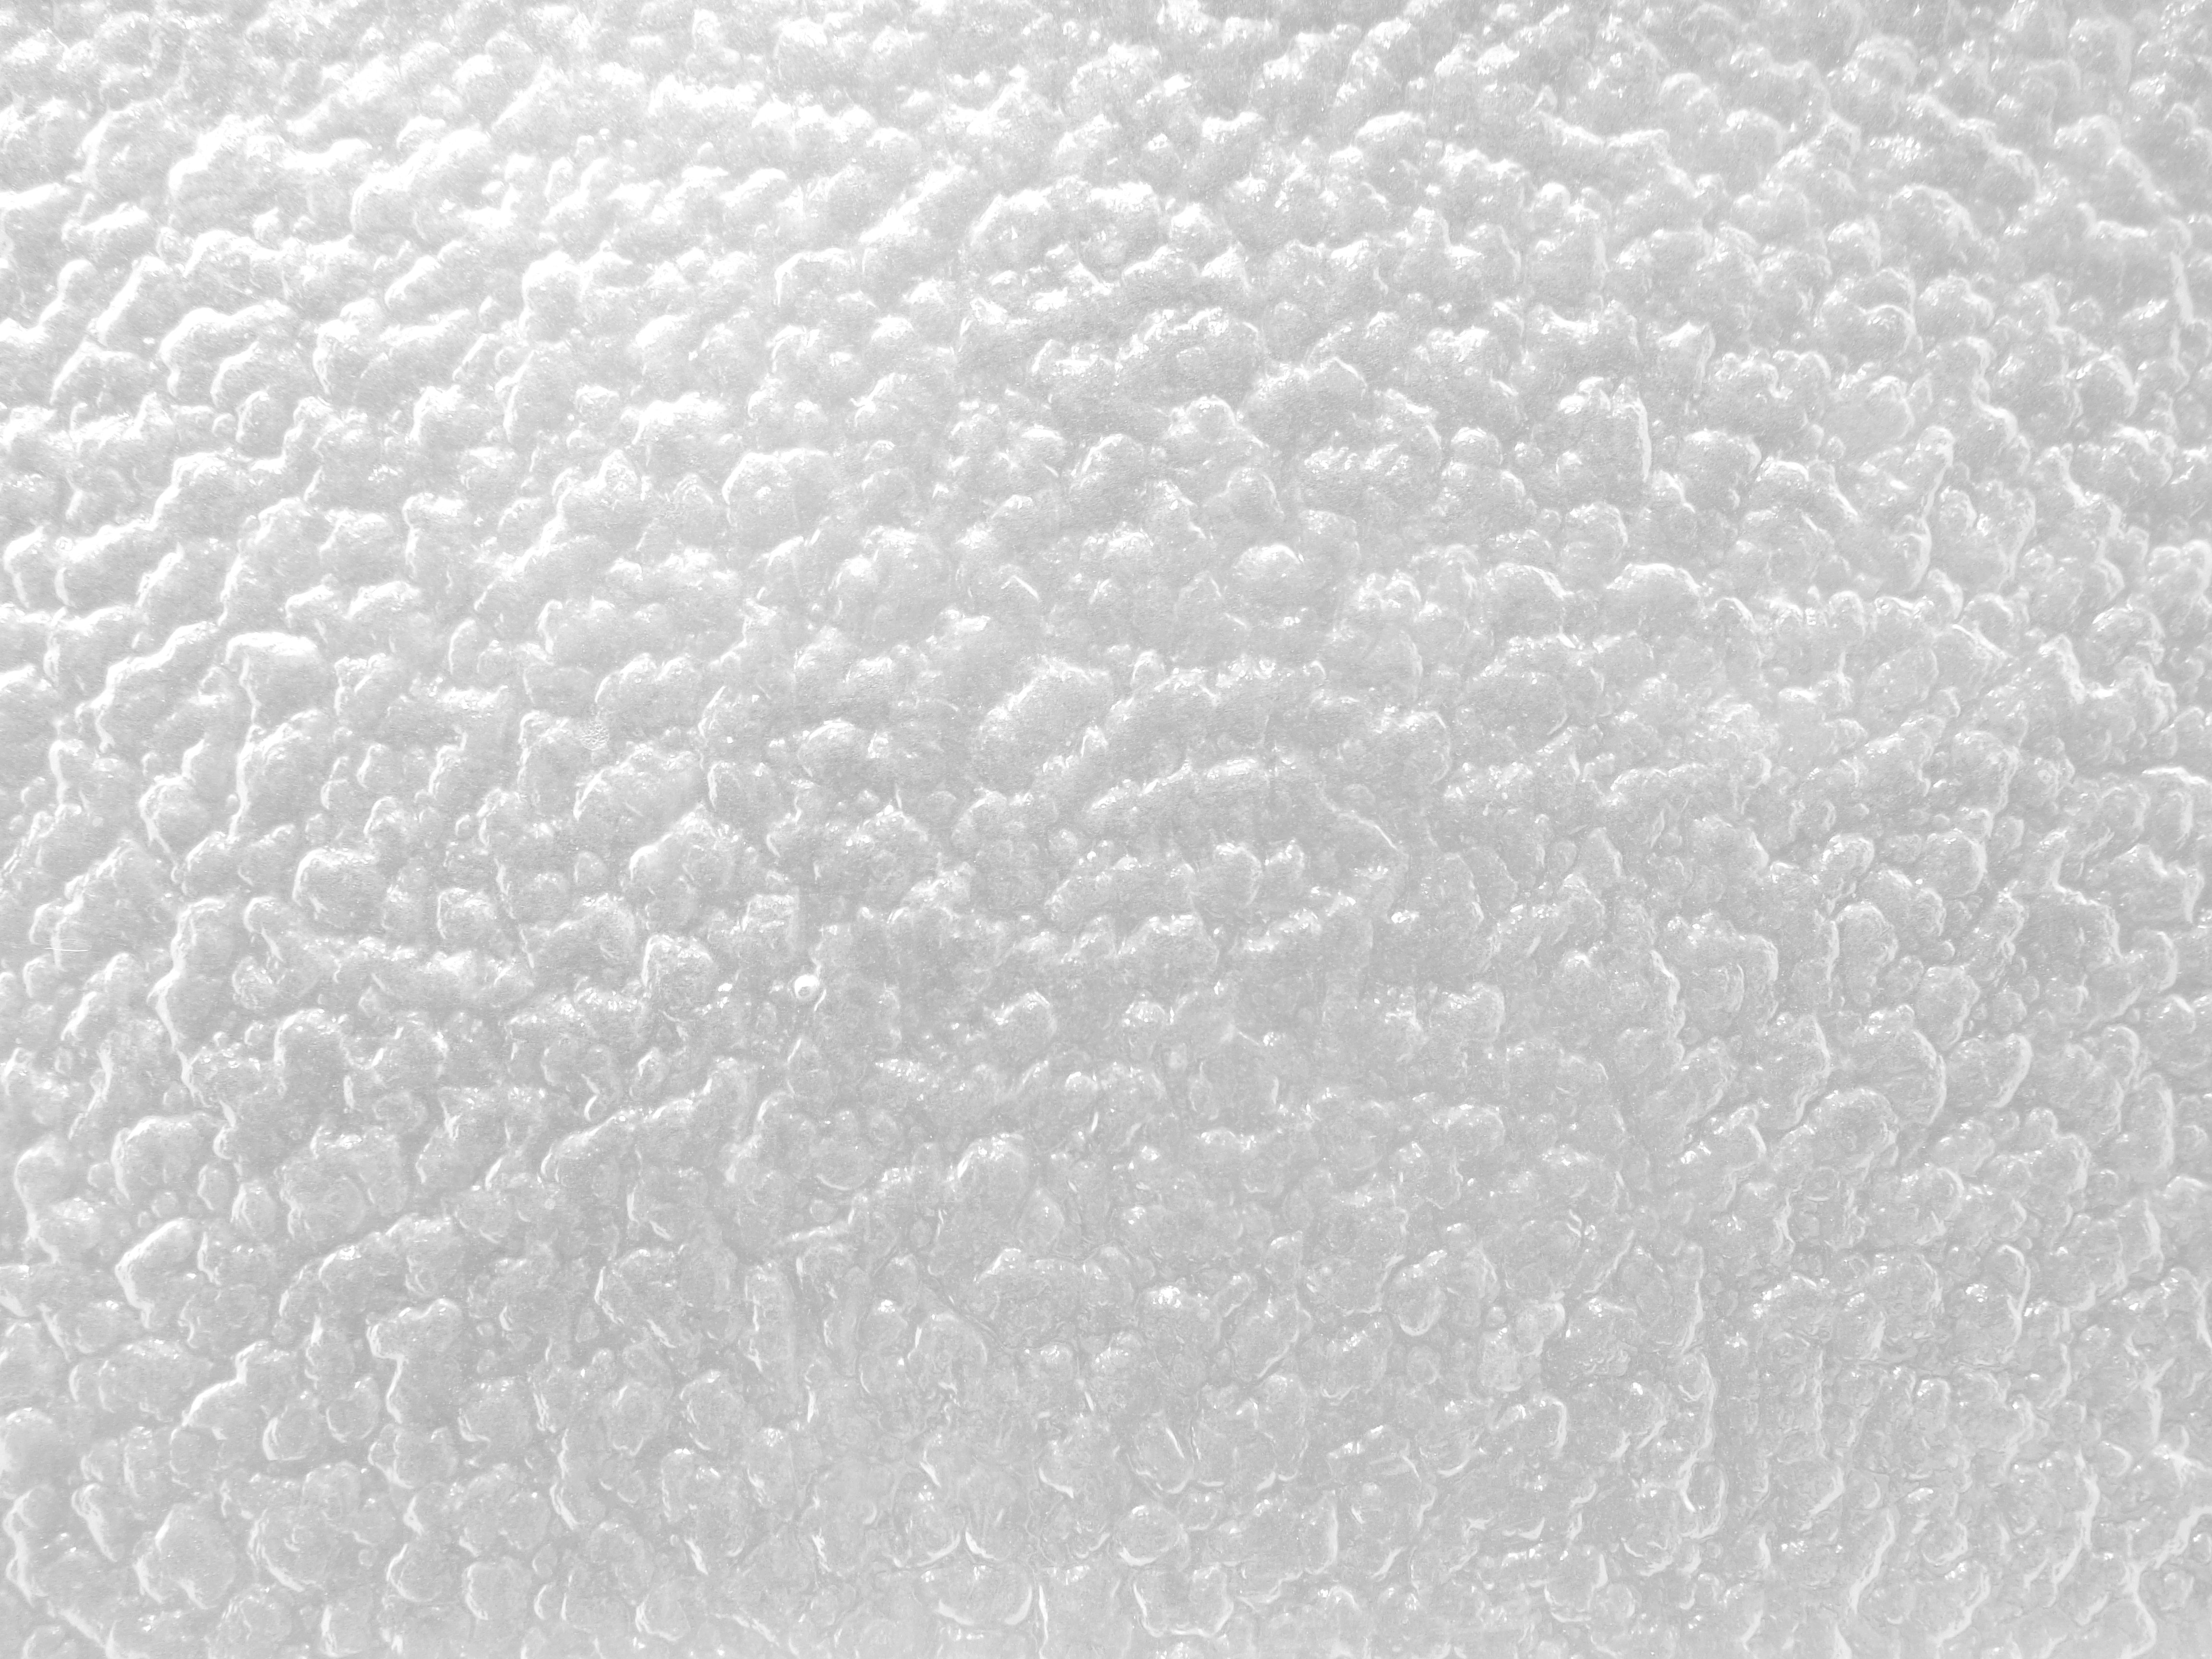 White Textured Glass With Bumpy Surface Picture Free Photograph Photos Public Domain